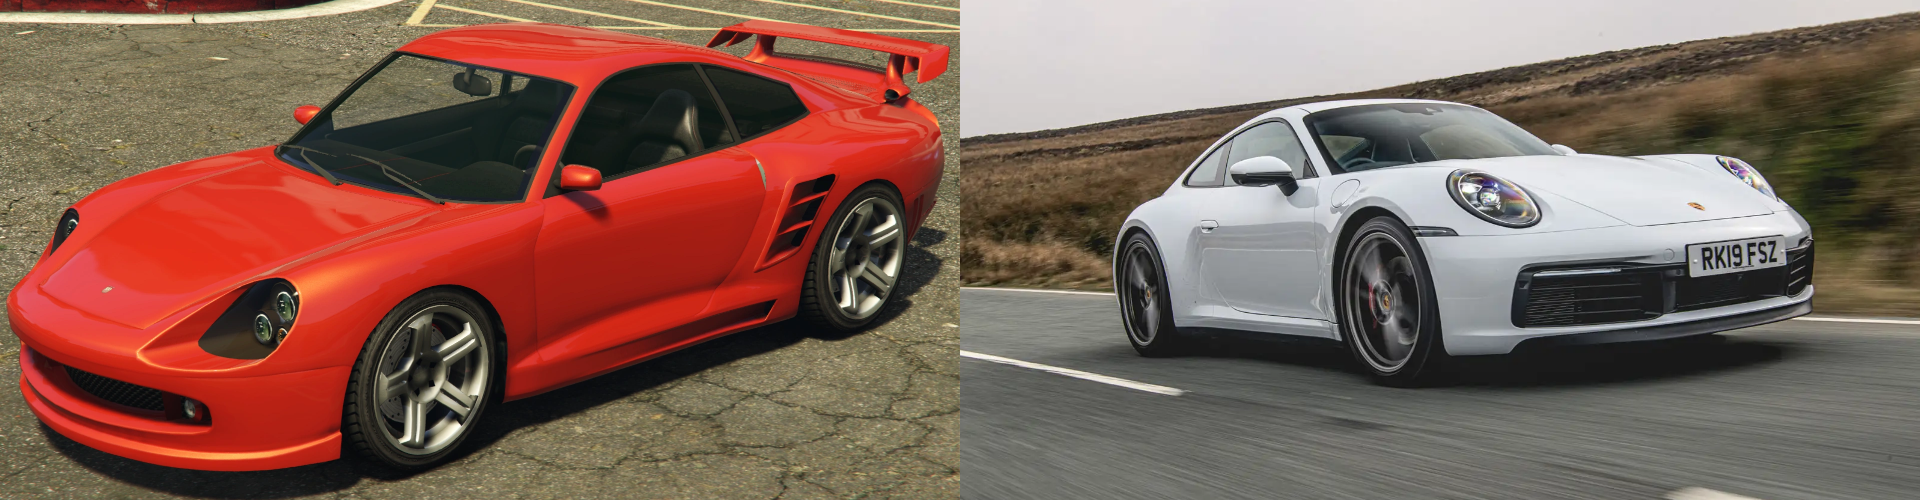 A side by side view of a virtual and real Porsche 911.